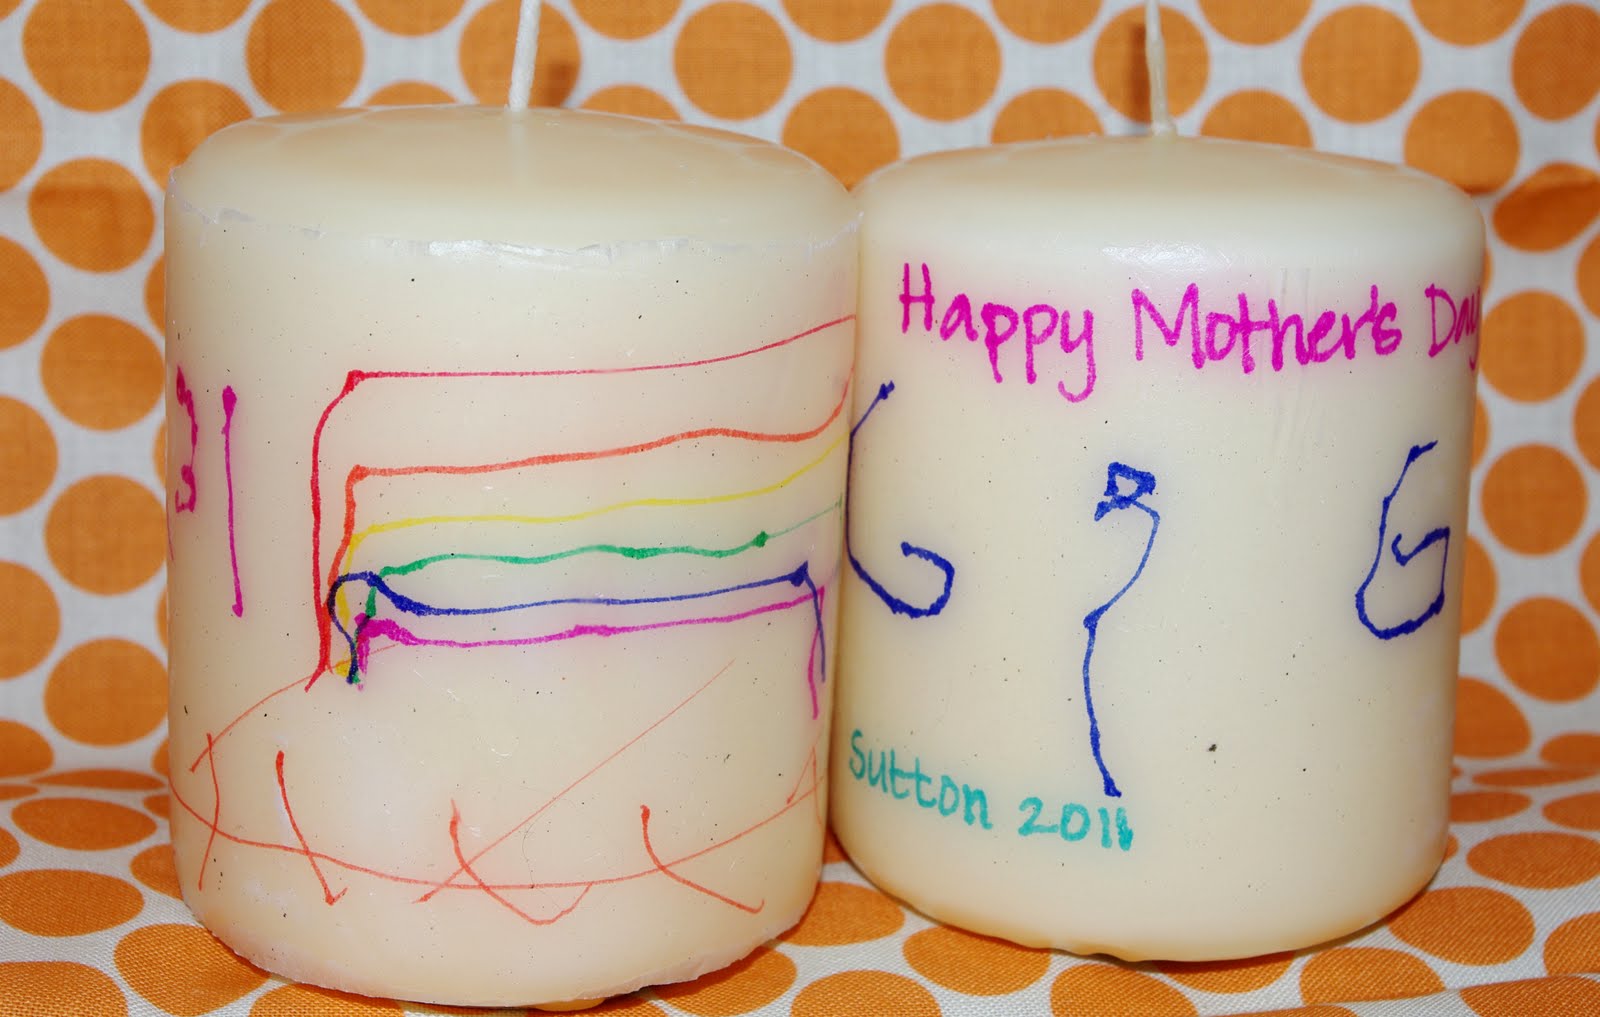 Vikalpah: 10 Last minute Mother's day gifts that are easy to make